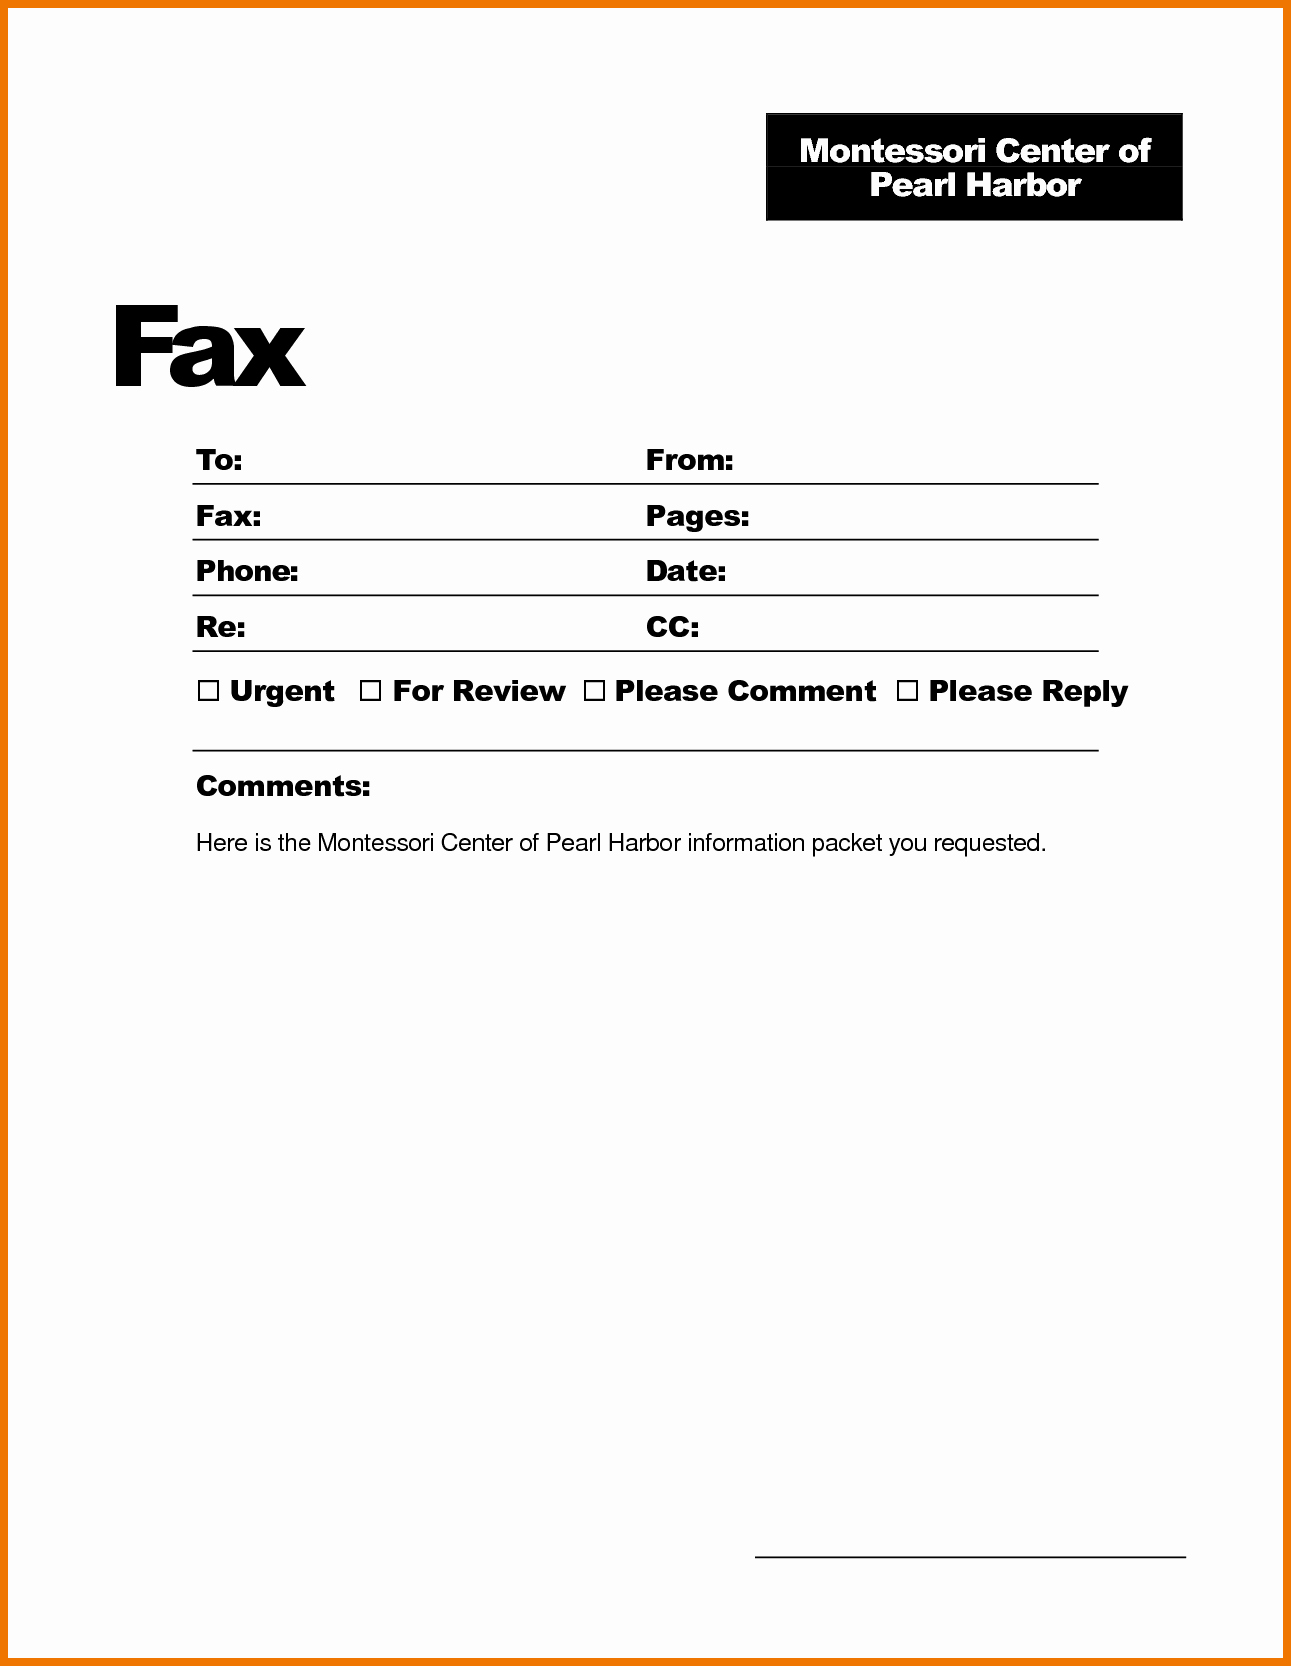 Examples Of Fax Cover Sheets Fresh Example Fax Cover Sheet Bamboodownunder